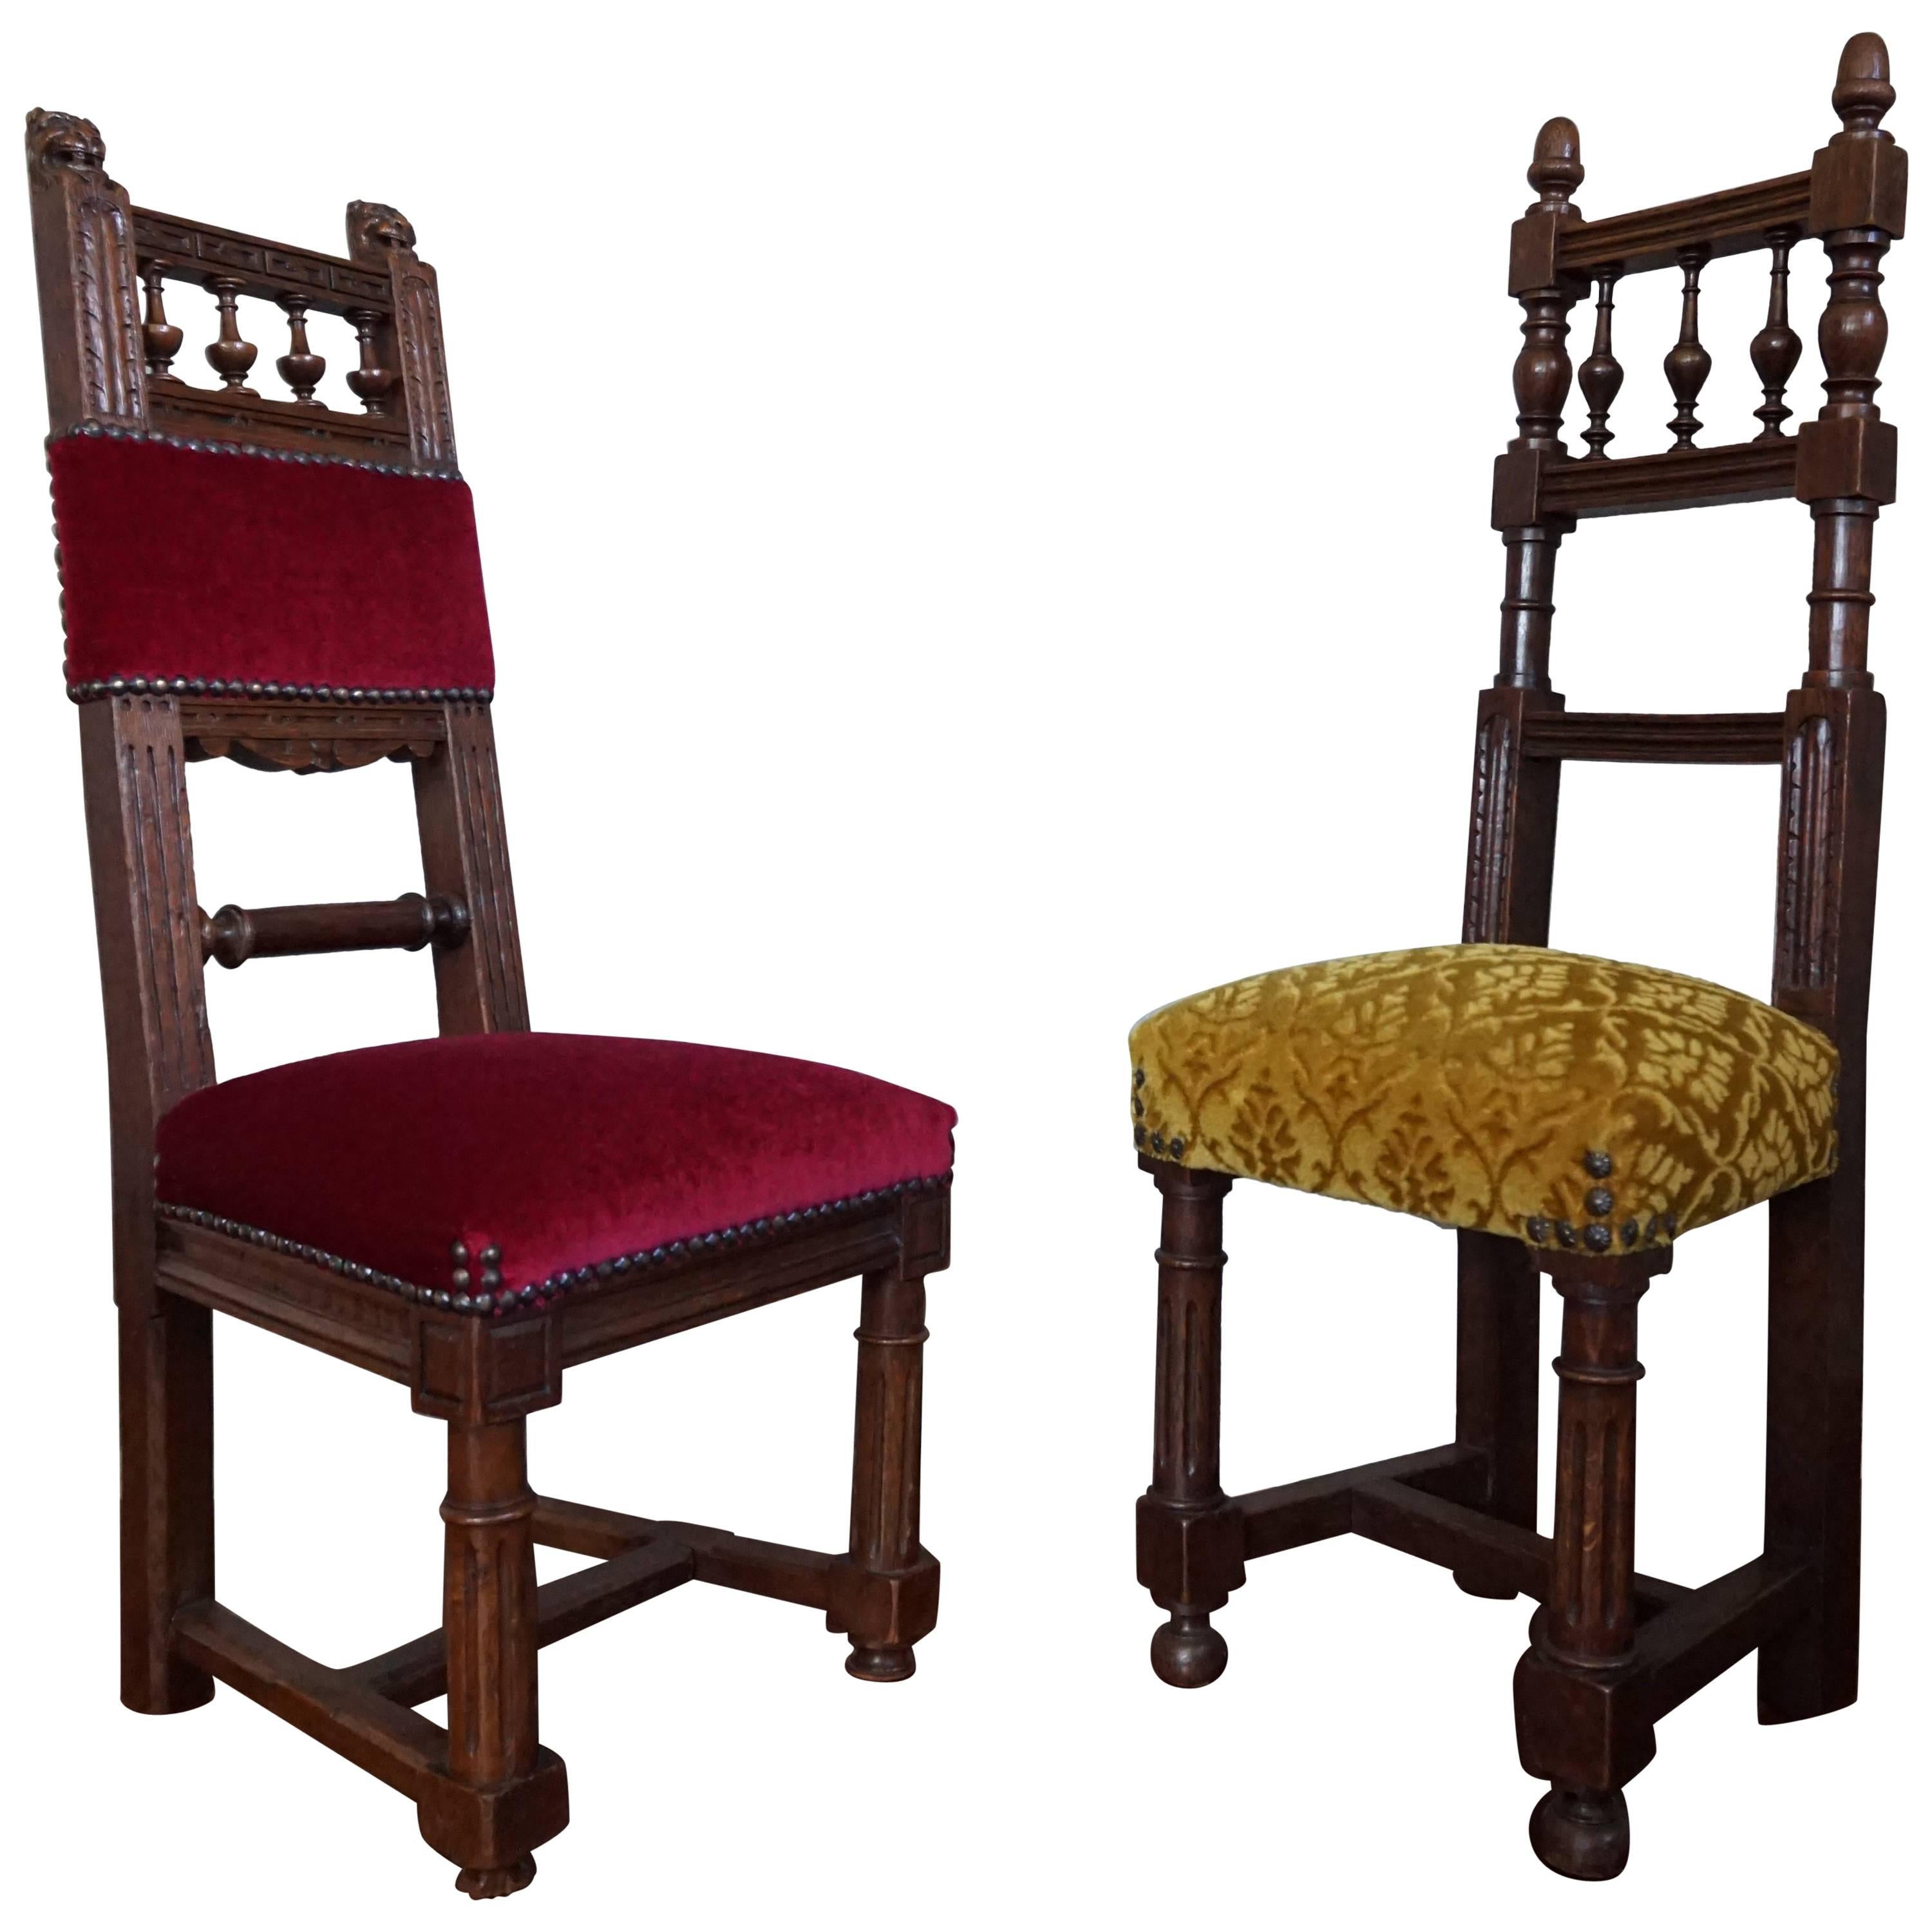 Two Excellent & Rare Handcrafted Solid Oak Chairs for Small Children or Dolls For Sale